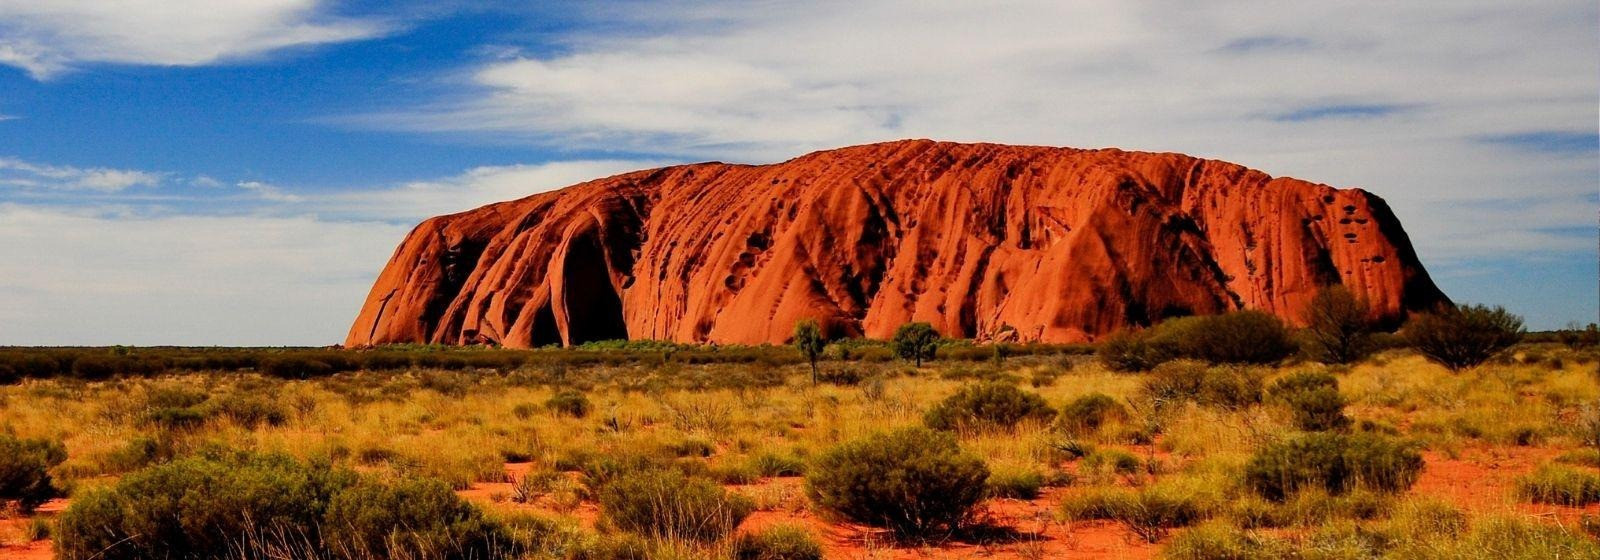 Uluru, also known as Ayers Rock, is the most famous place in Australia: an immense red monolith, alm